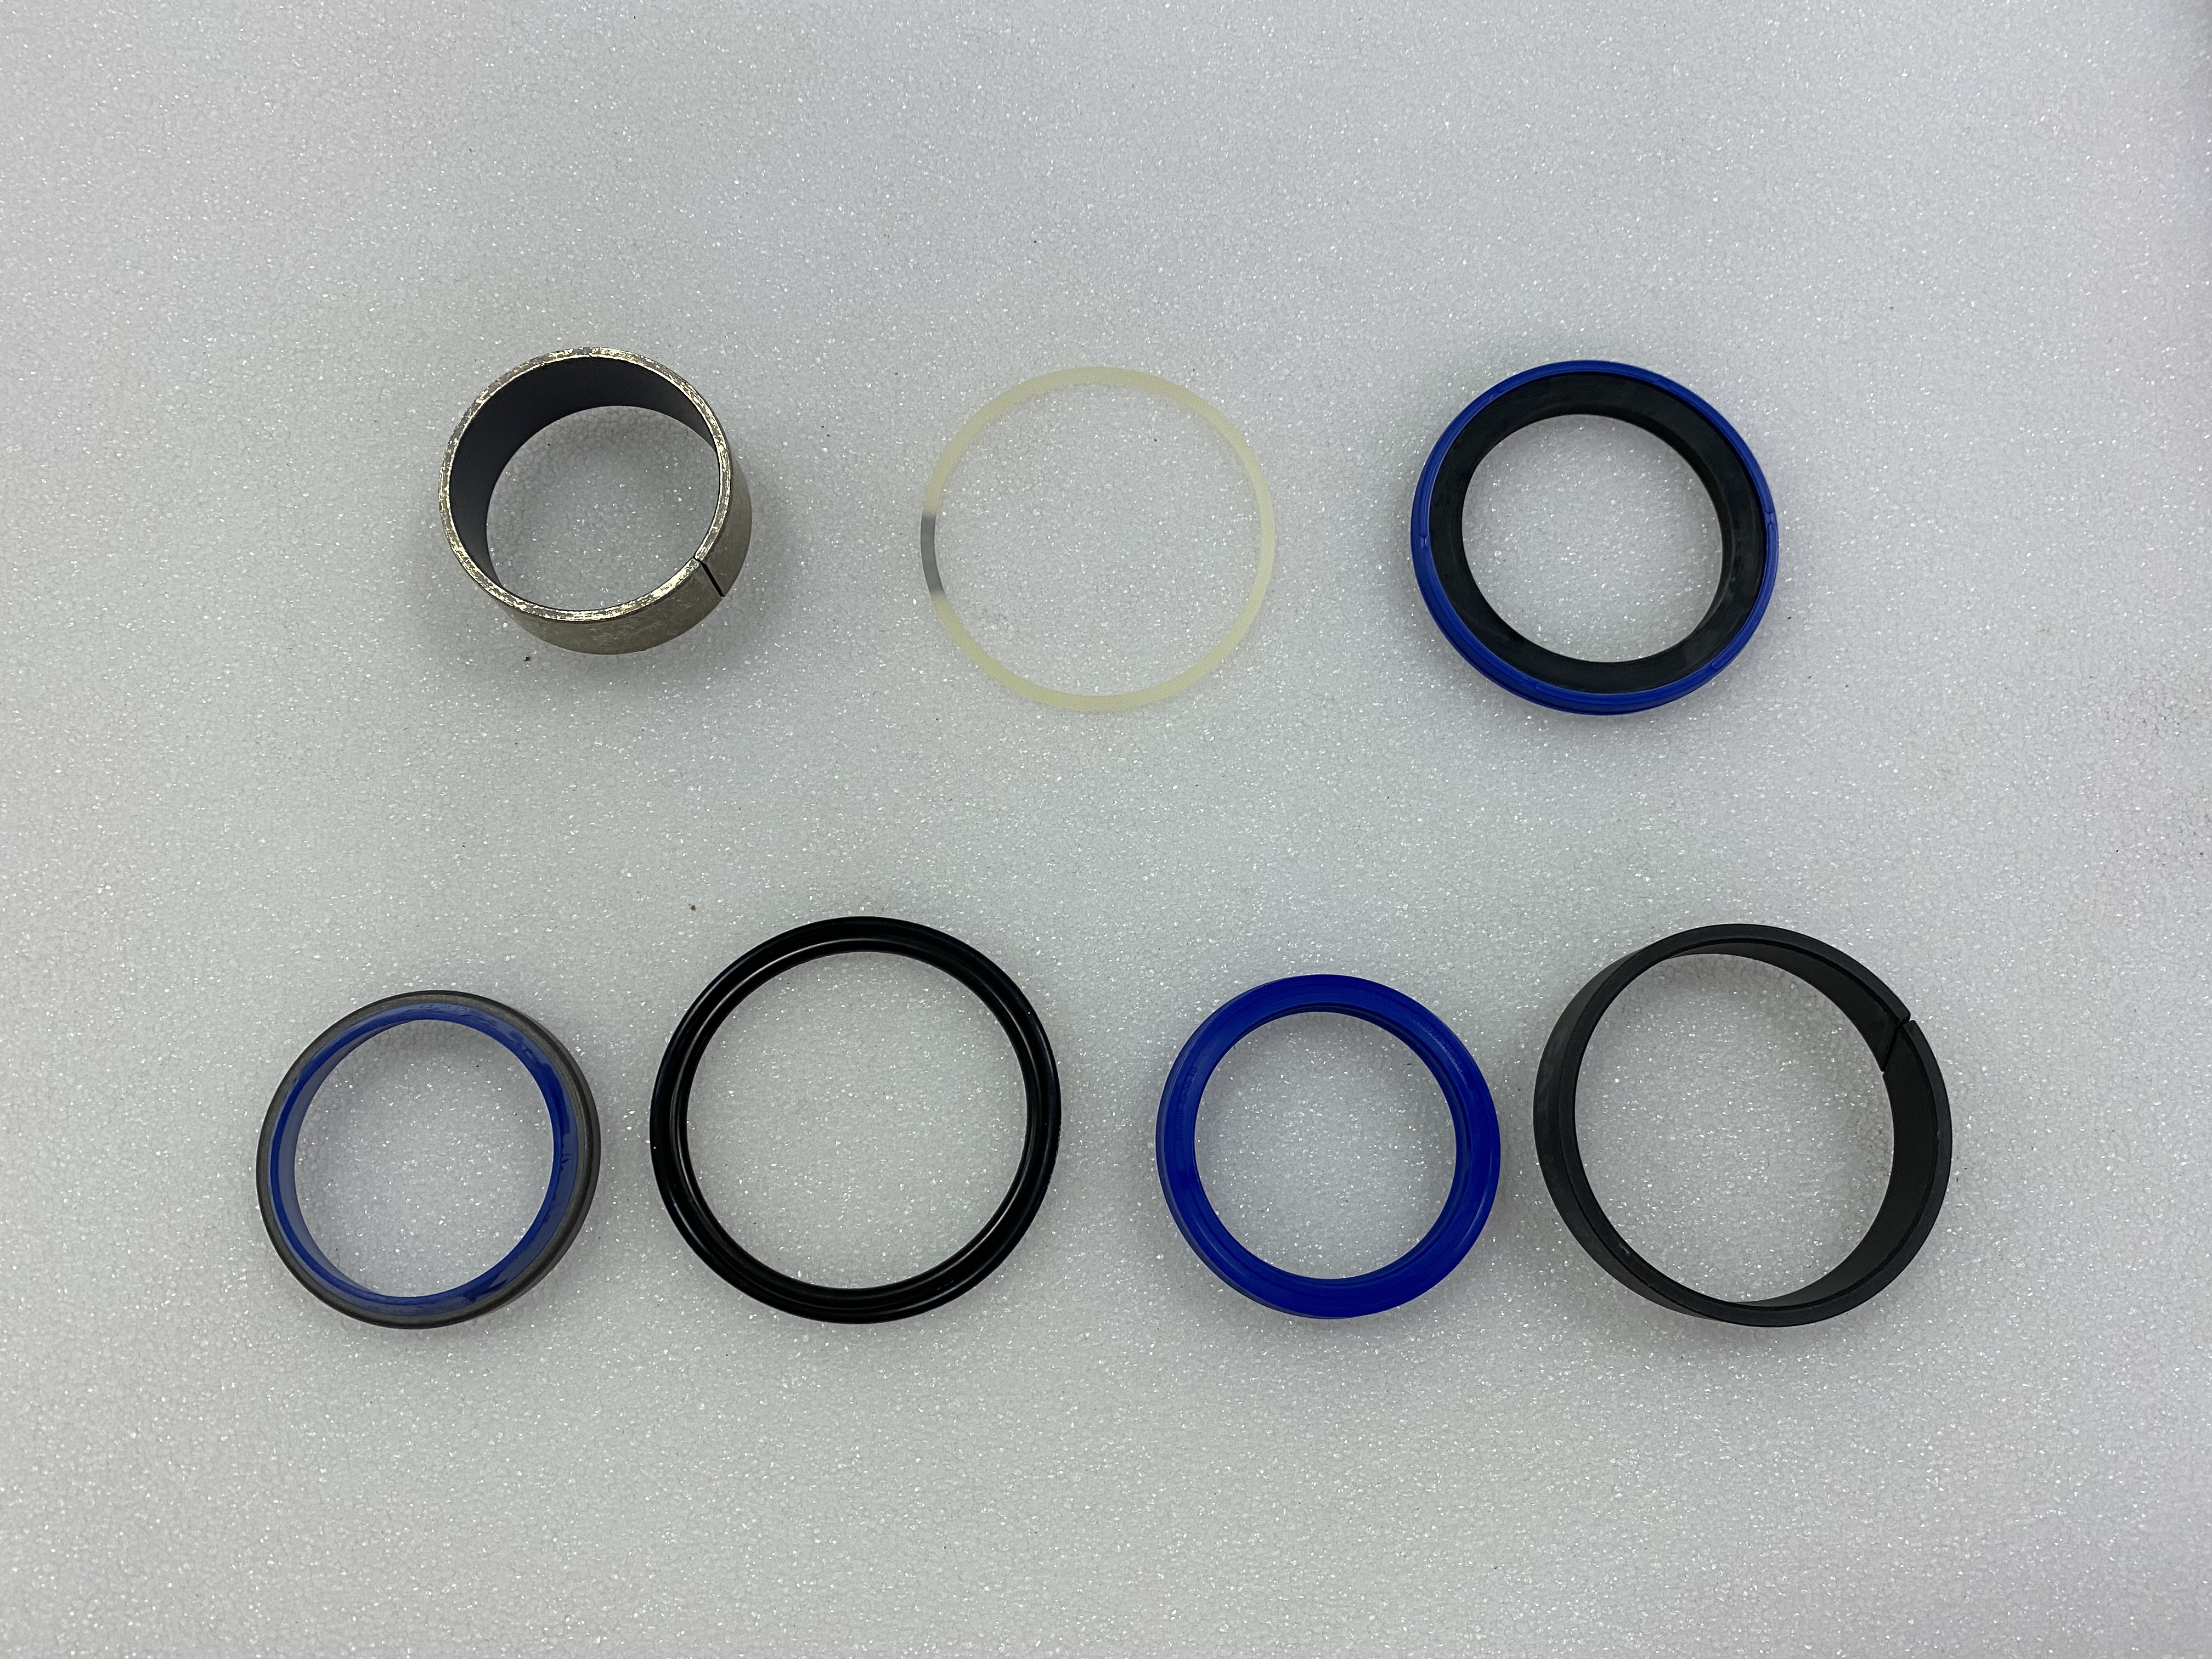 446-1412 replacement seal kit fitting for CAT skid steer Loader